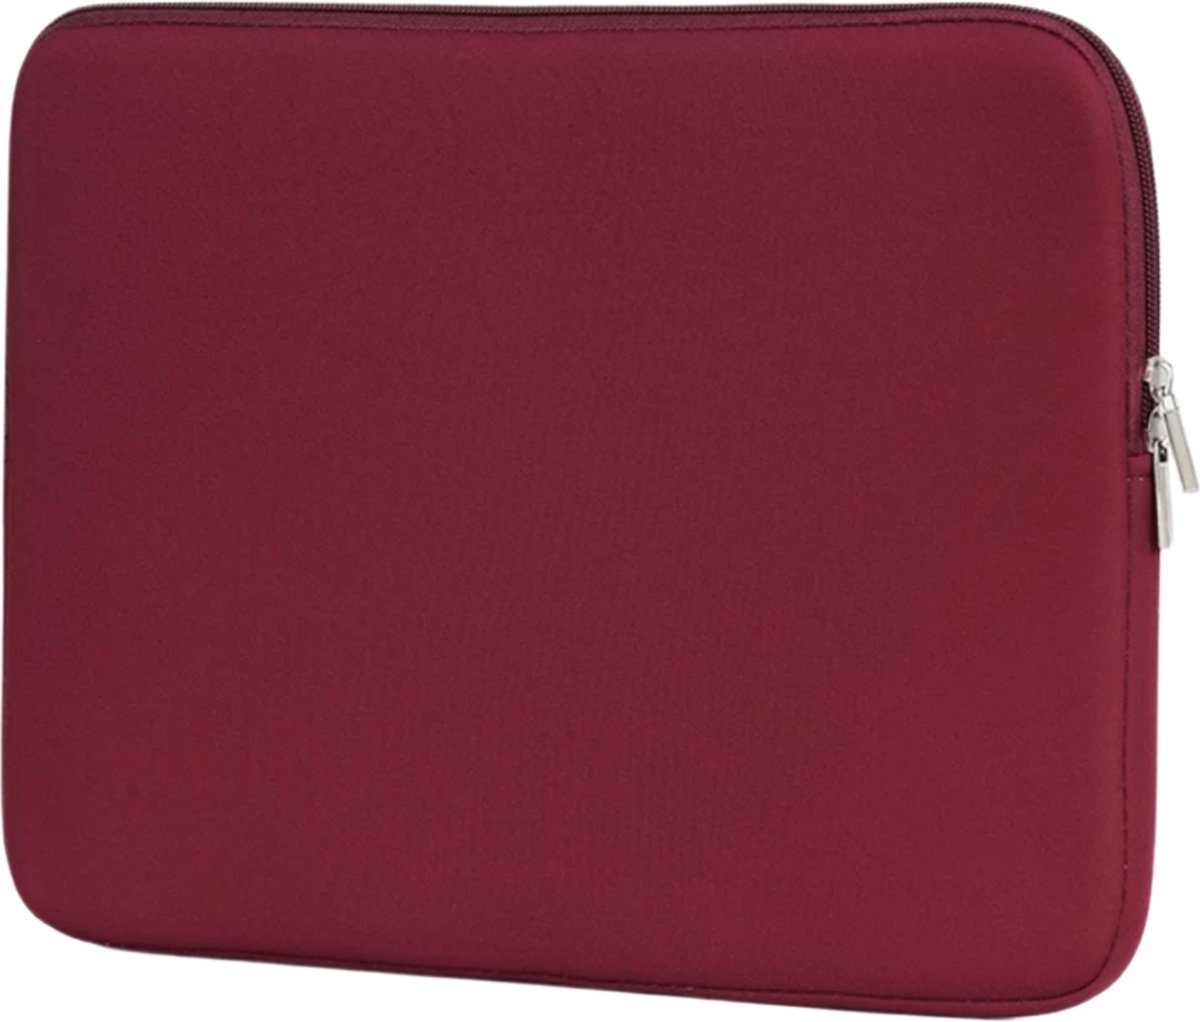 14,6 inch – laptopsleeve – soft touch – bordeaux rood- Ultra Licht-Notebook Tas - Dubbele Ritssluiting